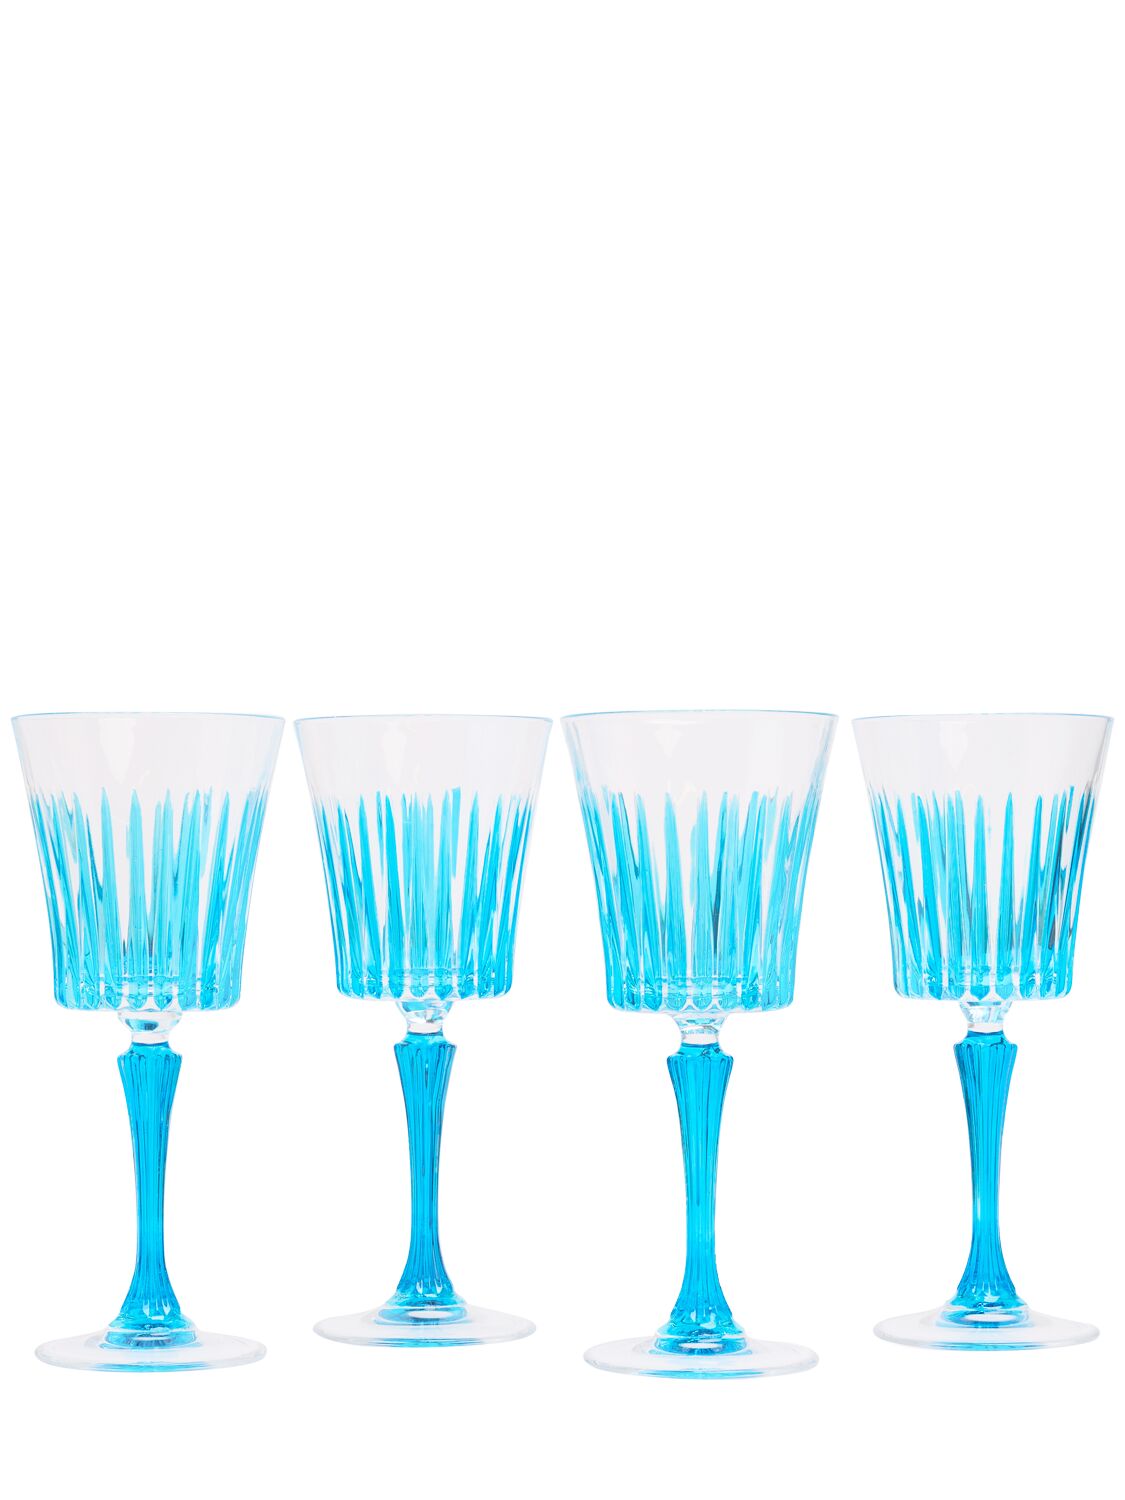 Image of Set Of 4 Hand-painted Wine Glasses